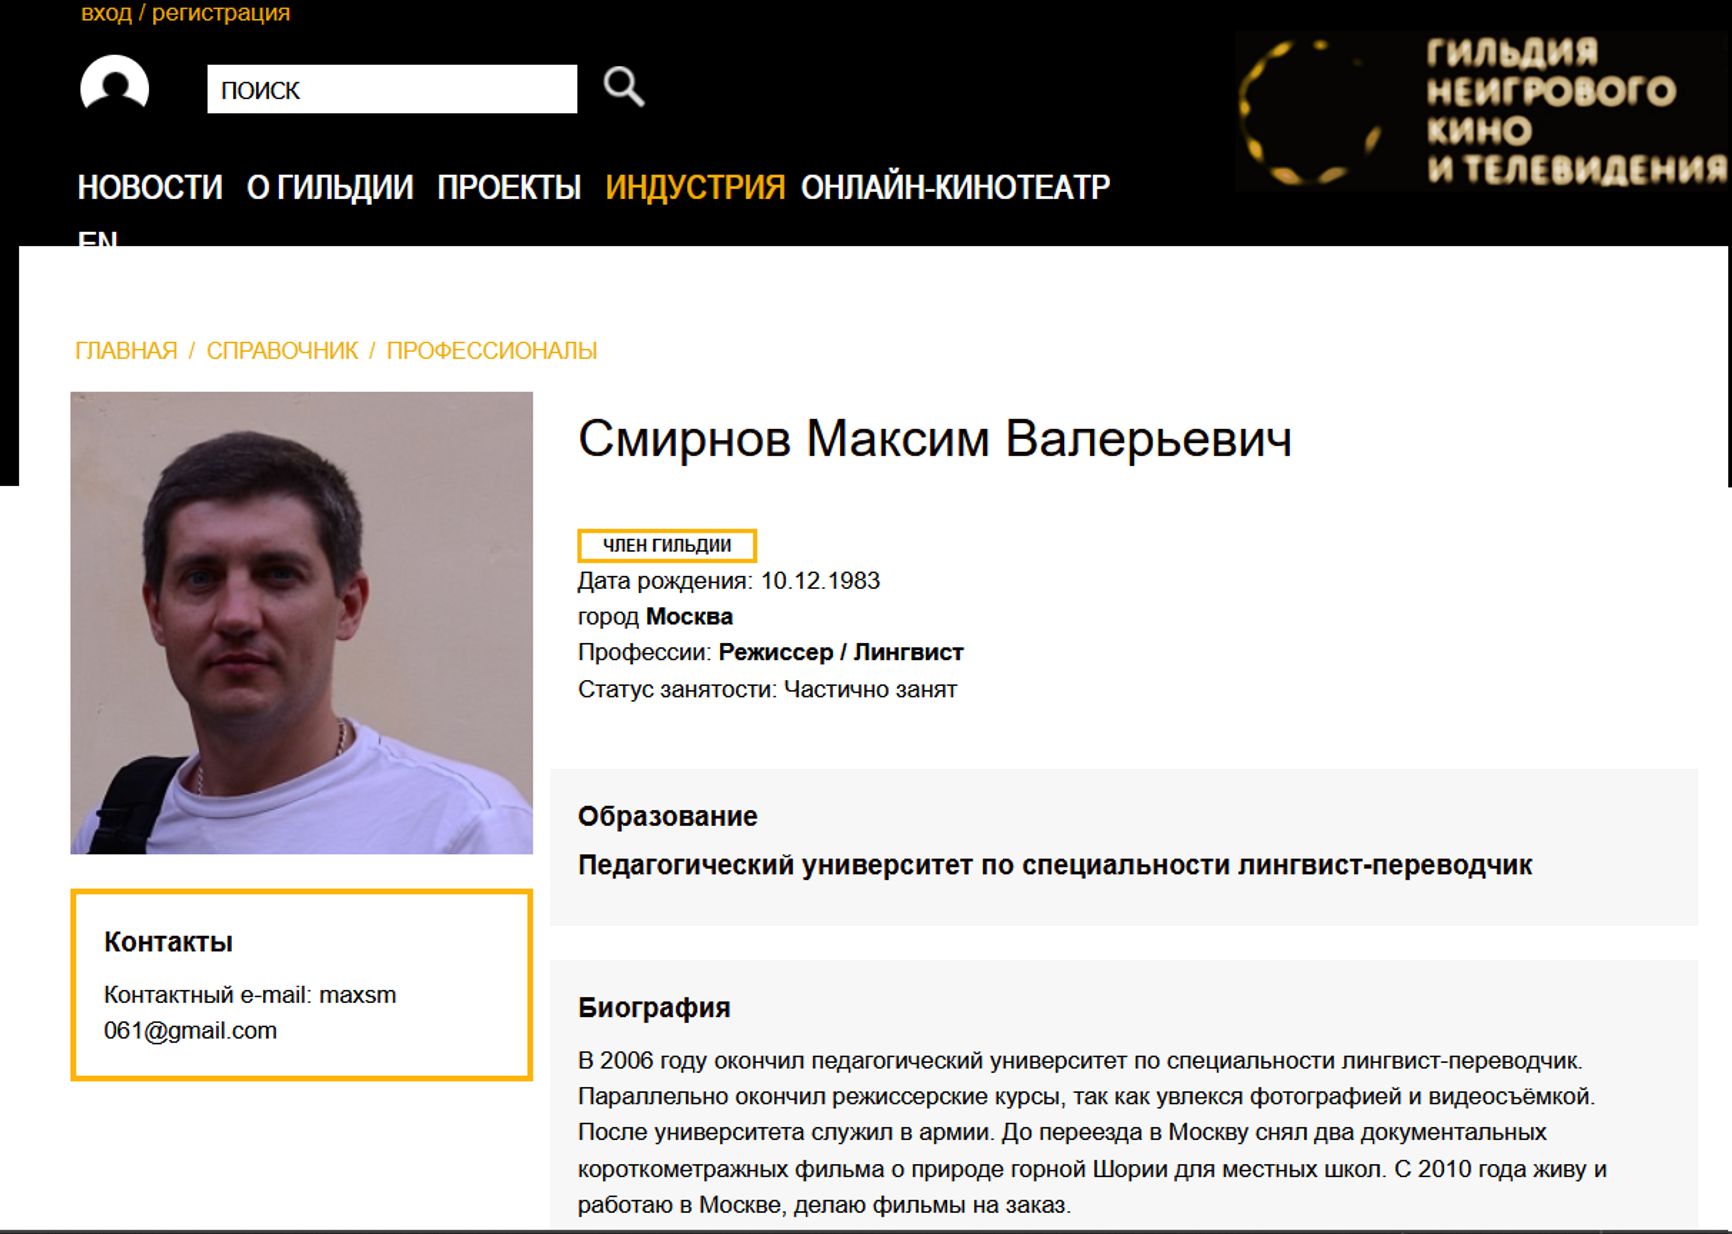 A profile for “Maksim Smirnov” on the website of the Russian Documentary Guild.